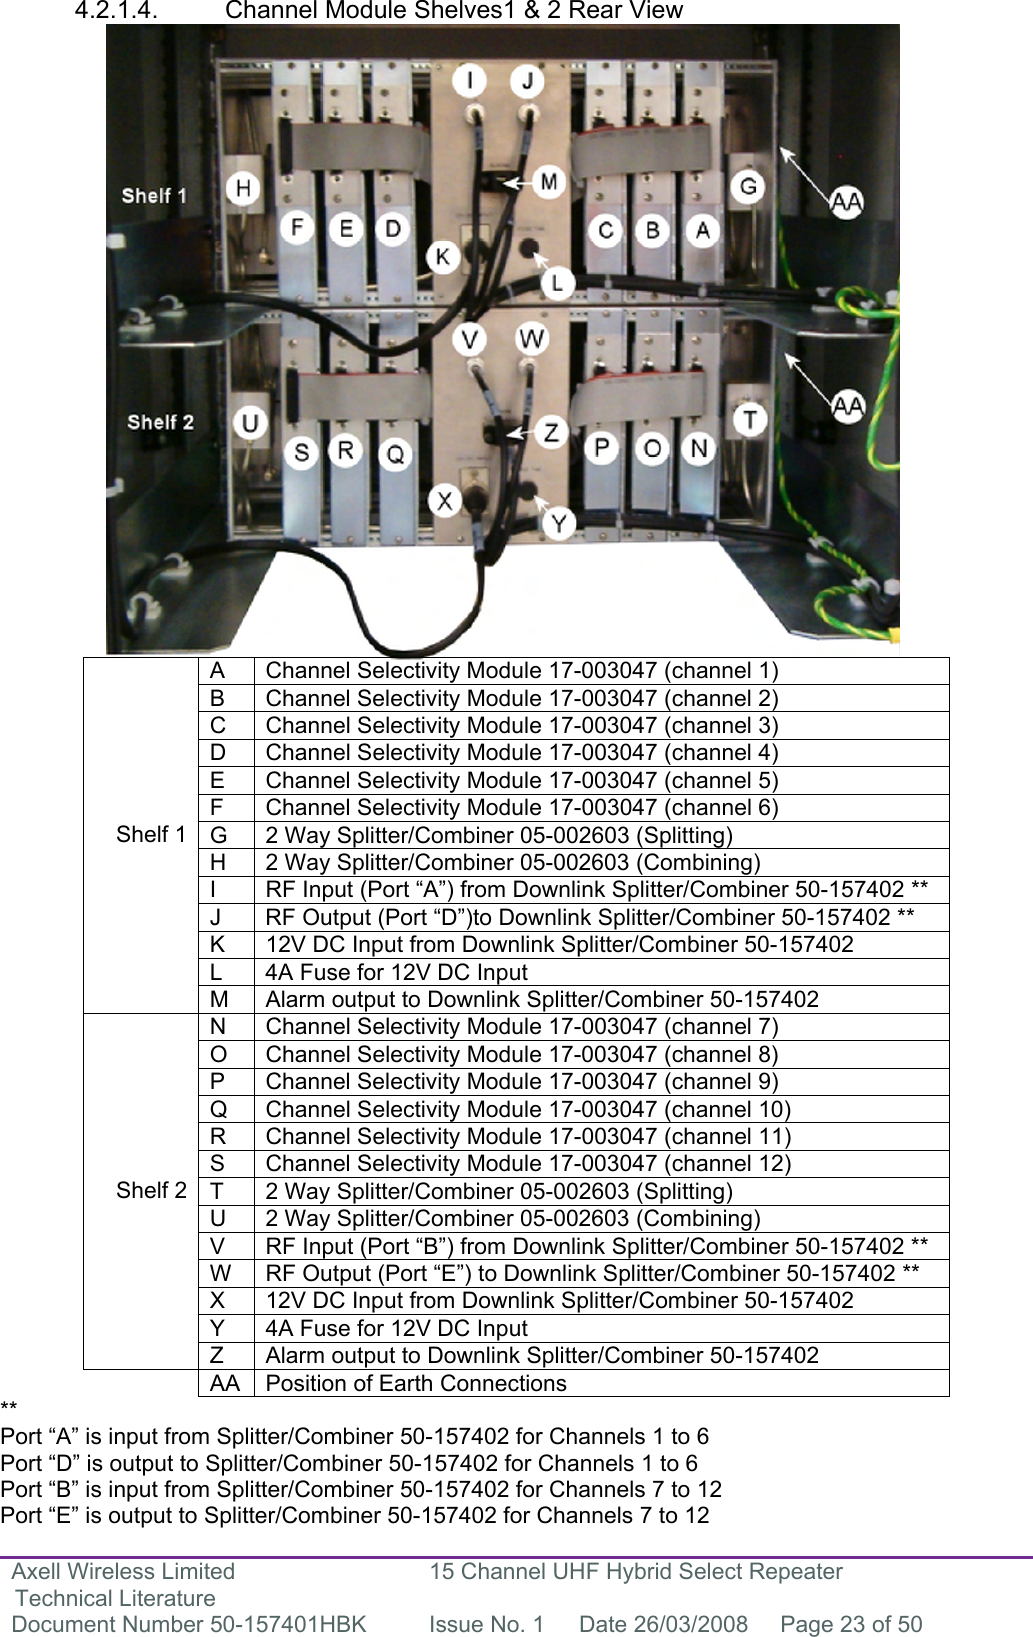 Axell Wireless Limited Technical Literature 15 Channel UHF Hybrid Select Repeater Document Number 50-157401HBK  Issue No. 1  Date 26/03/2008  Page 23 of 50   4.2.1.4.  Channel Module Shelves1 &amp; 2 Rear View                         A  Channel Selectivity Module 17-003047 (channel 1) B  Channel Selectivity Module 17-003047 (channel 2) C  Channel Selectivity Module 17-003047 (channel 3) D  Channel Selectivity Module 17-003047 (channel 4) E  Channel Selectivity Module 17-003047 (channel 5) F  Channel Selectivity Module 17-003047 (channel 6) G  2 Way Splitter/Combiner 05-002603 (Splitting) H  2 Way Splitter/Combiner 05-002603 (Combining) I  RF Input (Port “A”) from Downlink Splitter/Combiner 50-157402 ** J  RF Output (Port “D”)to Downlink Splitter/Combiner 50-157402 ** K  12V DC Input from Downlink Splitter/Combiner 50-157402 L  4A Fuse for 12V DC Input Shelf 1 M  Alarm output to Downlink Splitter/Combiner 50-157402 N  Channel Selectivity Module 17-003047 (channel 7) O  Channel Selectivity Module 17-003047 (channel 8) P  Channel Selectivity Module 17-003047 (channel 9) Q  Channel Selectivity Module 17-003047 (channel 10) R  Channel Selectivity Module 17-003047 (channel 11) S  Channel Selectivity Module 17-003047 (channel 12) T  2 Way Splitter/Combiner 05-002603 (Splitting) U  2 Way Splitter/Combiner 05-002603 (Combining) V  RF Input (Port “B”) from Downlink Splitter/Combiner 50-157402 ** W  RF Output (Port “E”) to Downlink Splitter/Combiner 50-157402 ** X  12V DC Input from Downlink Splitter/Combiner 50-157402 Y  4A Fuse for 12V DC Input Shelf 2 Z  Alarm output to Downlink Splitter/Combiner 50-157402   AA  Position of Earth Connections **  Port “A” is input from Splitter/Combiner 50-157402 for Channels 1 to 6 Port “D” is output to Splitter/Combiner 50-157402 for Channels 1 to 6 Port “B” is input from Splitter/Combiner 50-157402 for Channels 7 to 12 Port “E” is output to Splitter/Combiner 50-157402 for Channels 7 to 12 